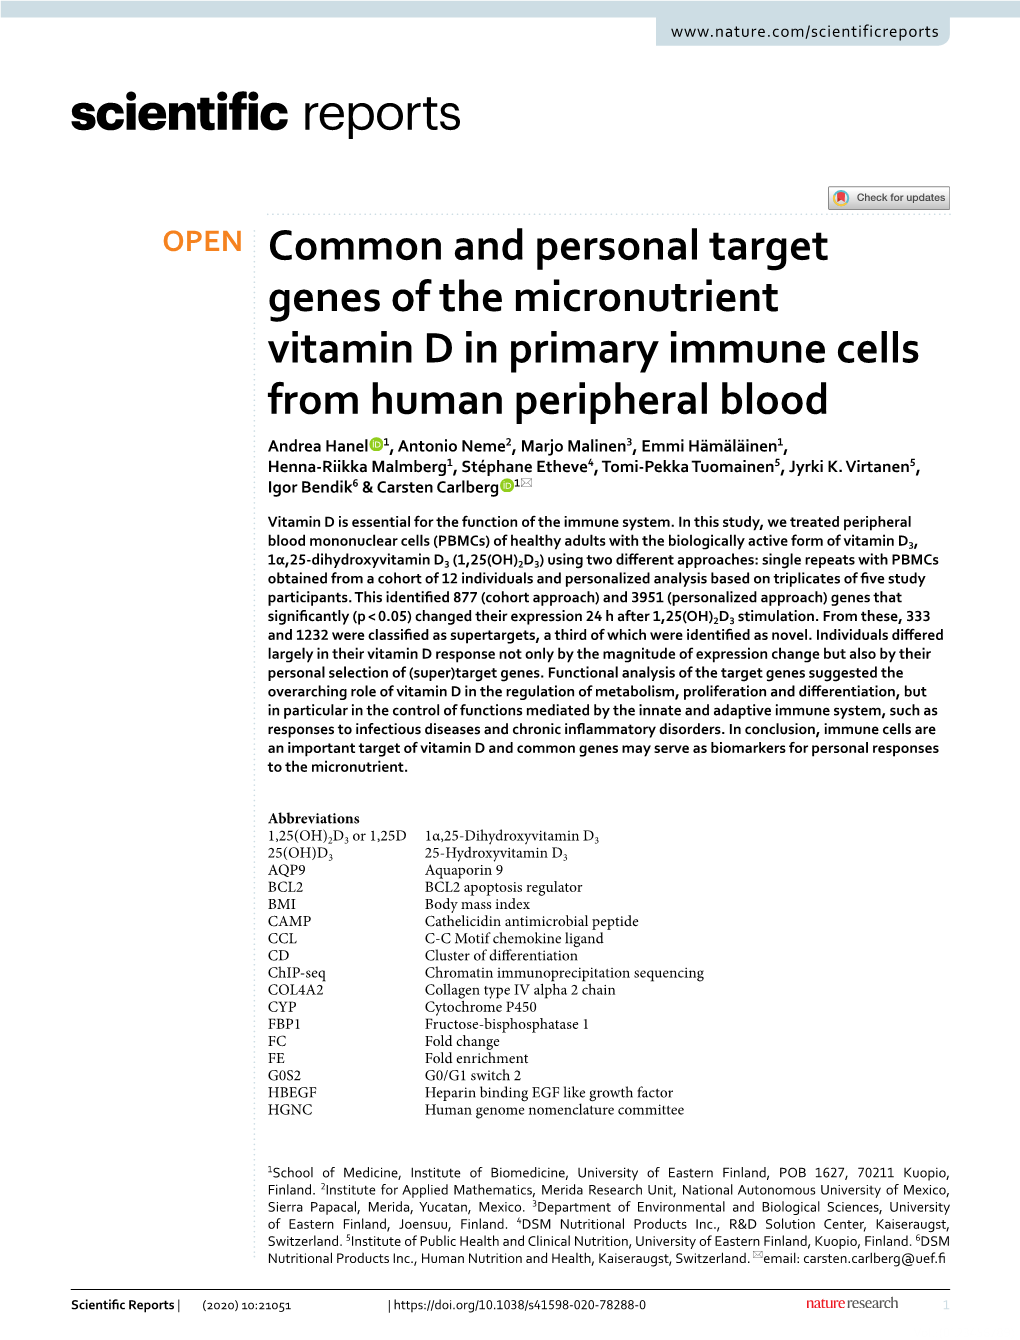 Common and Personal Target Genes of the Micronutrient Vitamin D In